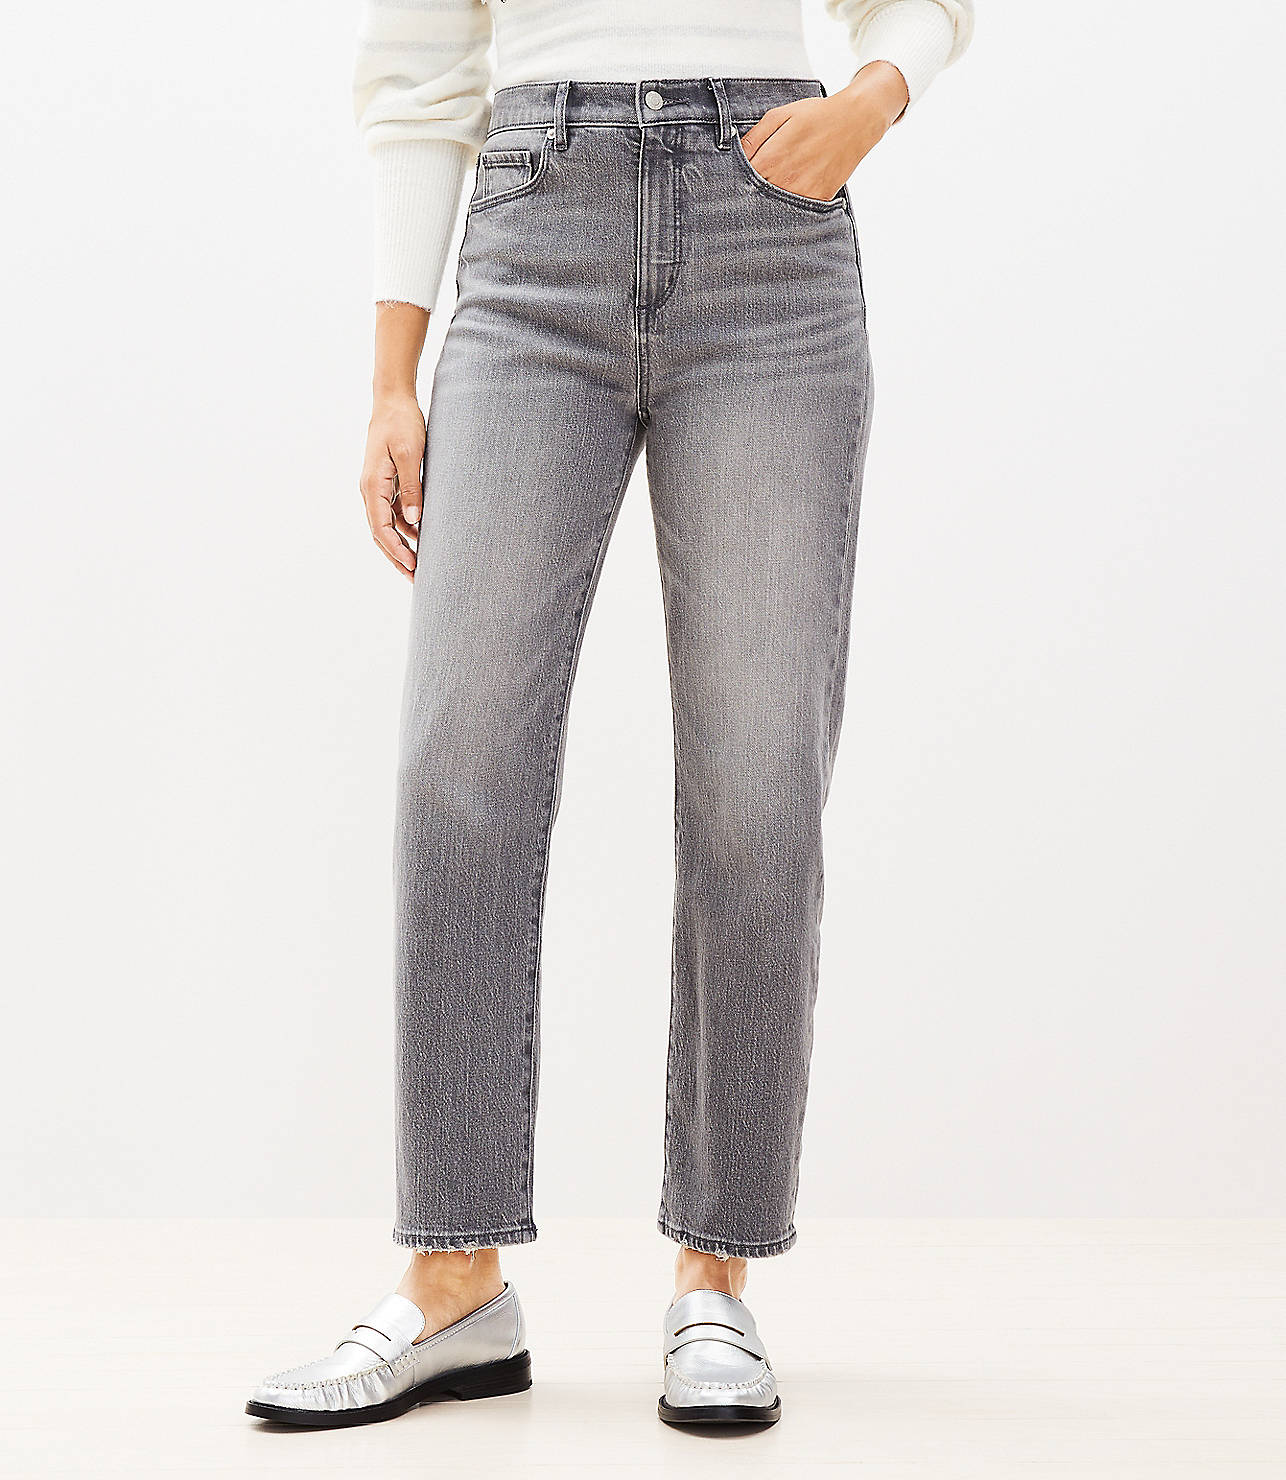 Petite High Rise Straight Jeans in Vintage Grey Wash